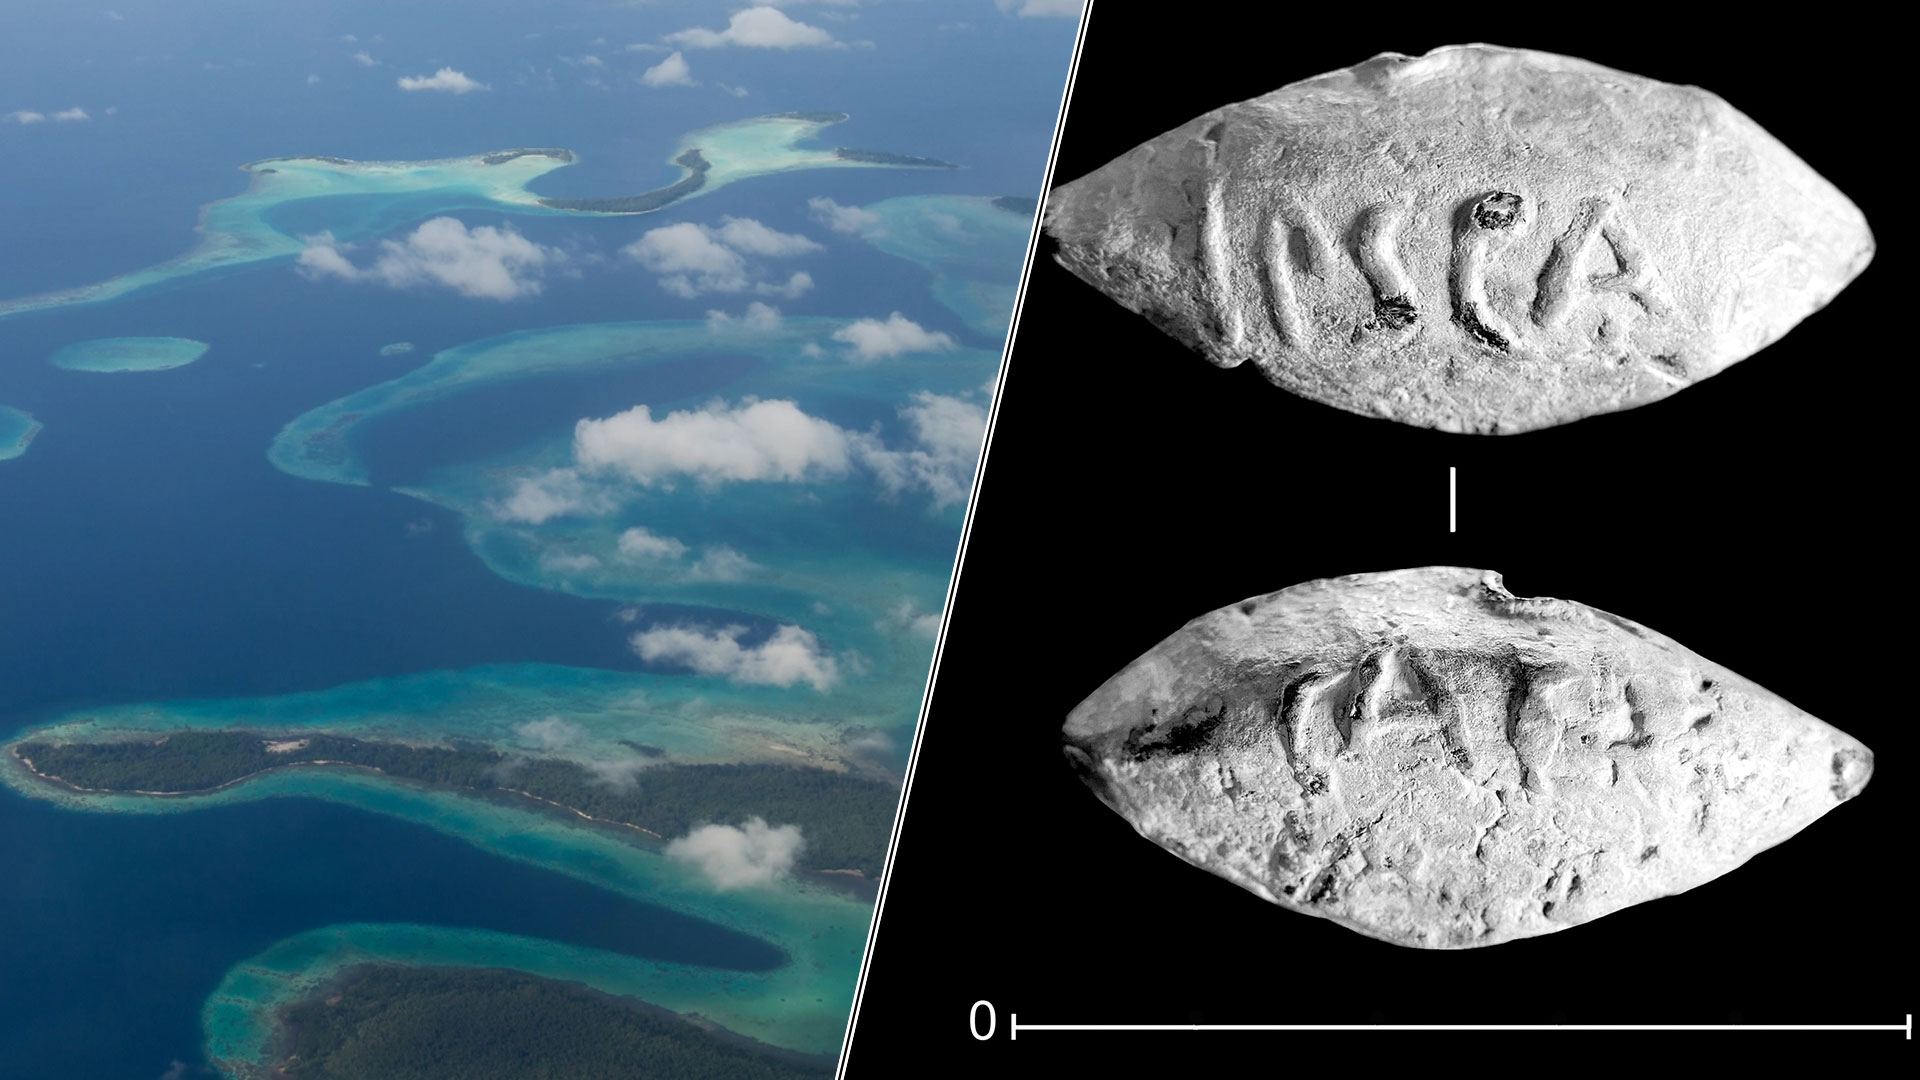 5 stories making science news this week: A Pacific 'superstructure' and an ancient Roman bullet thumbnail